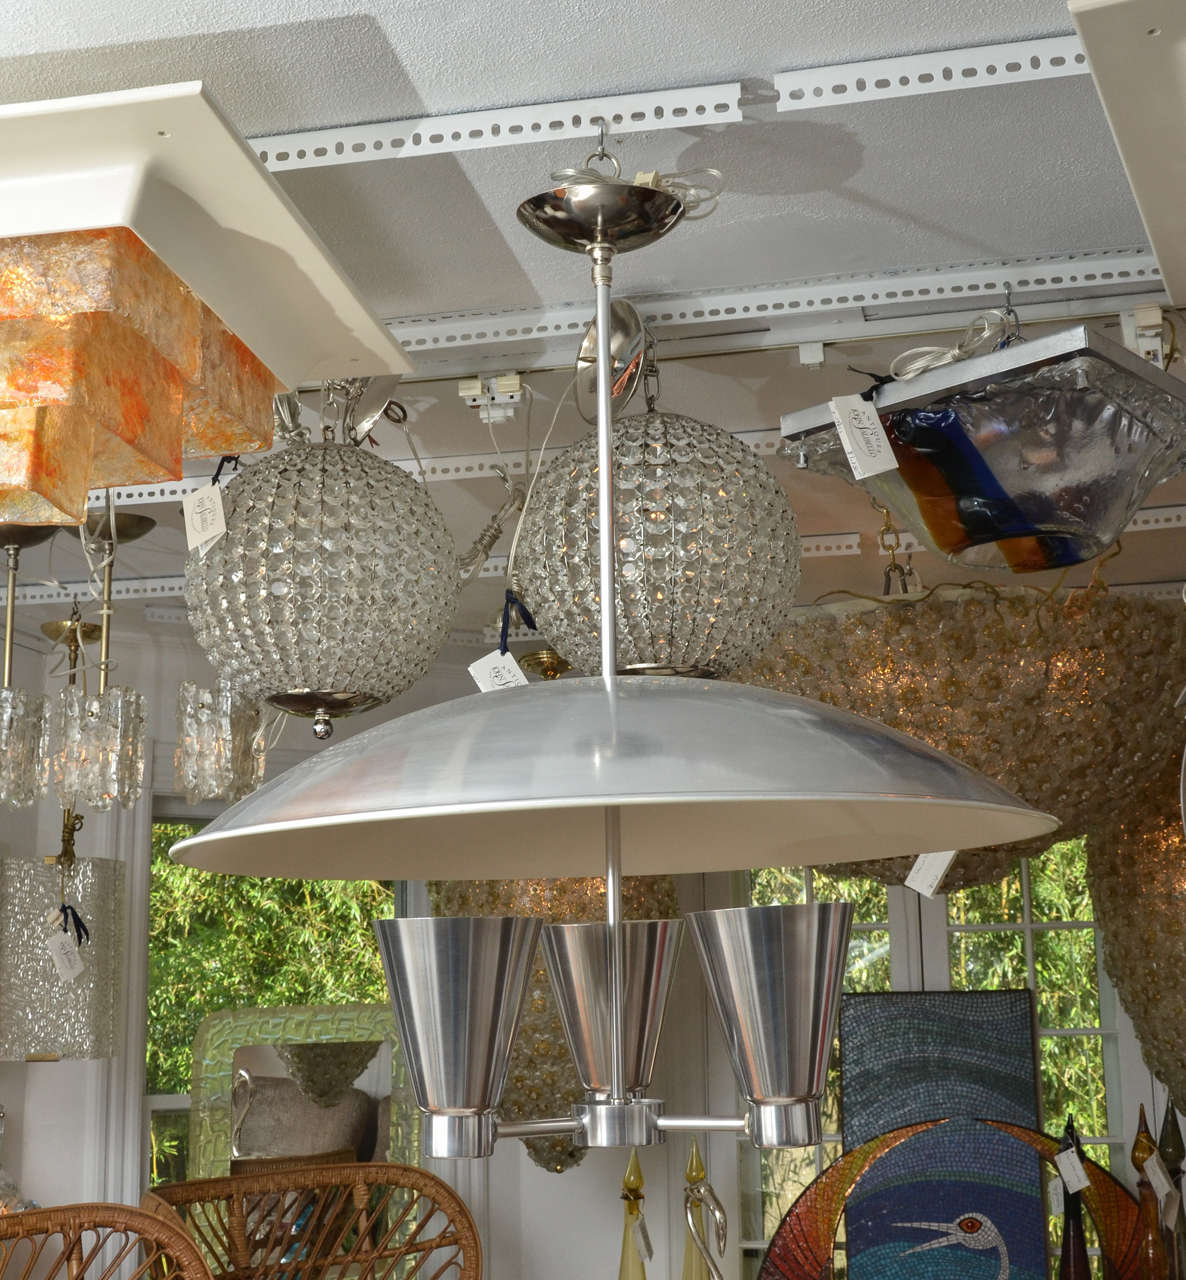 Spun aluminium dome ceiling fixture with three conical uplights by Edward Wormley.
Three standard bulbs.